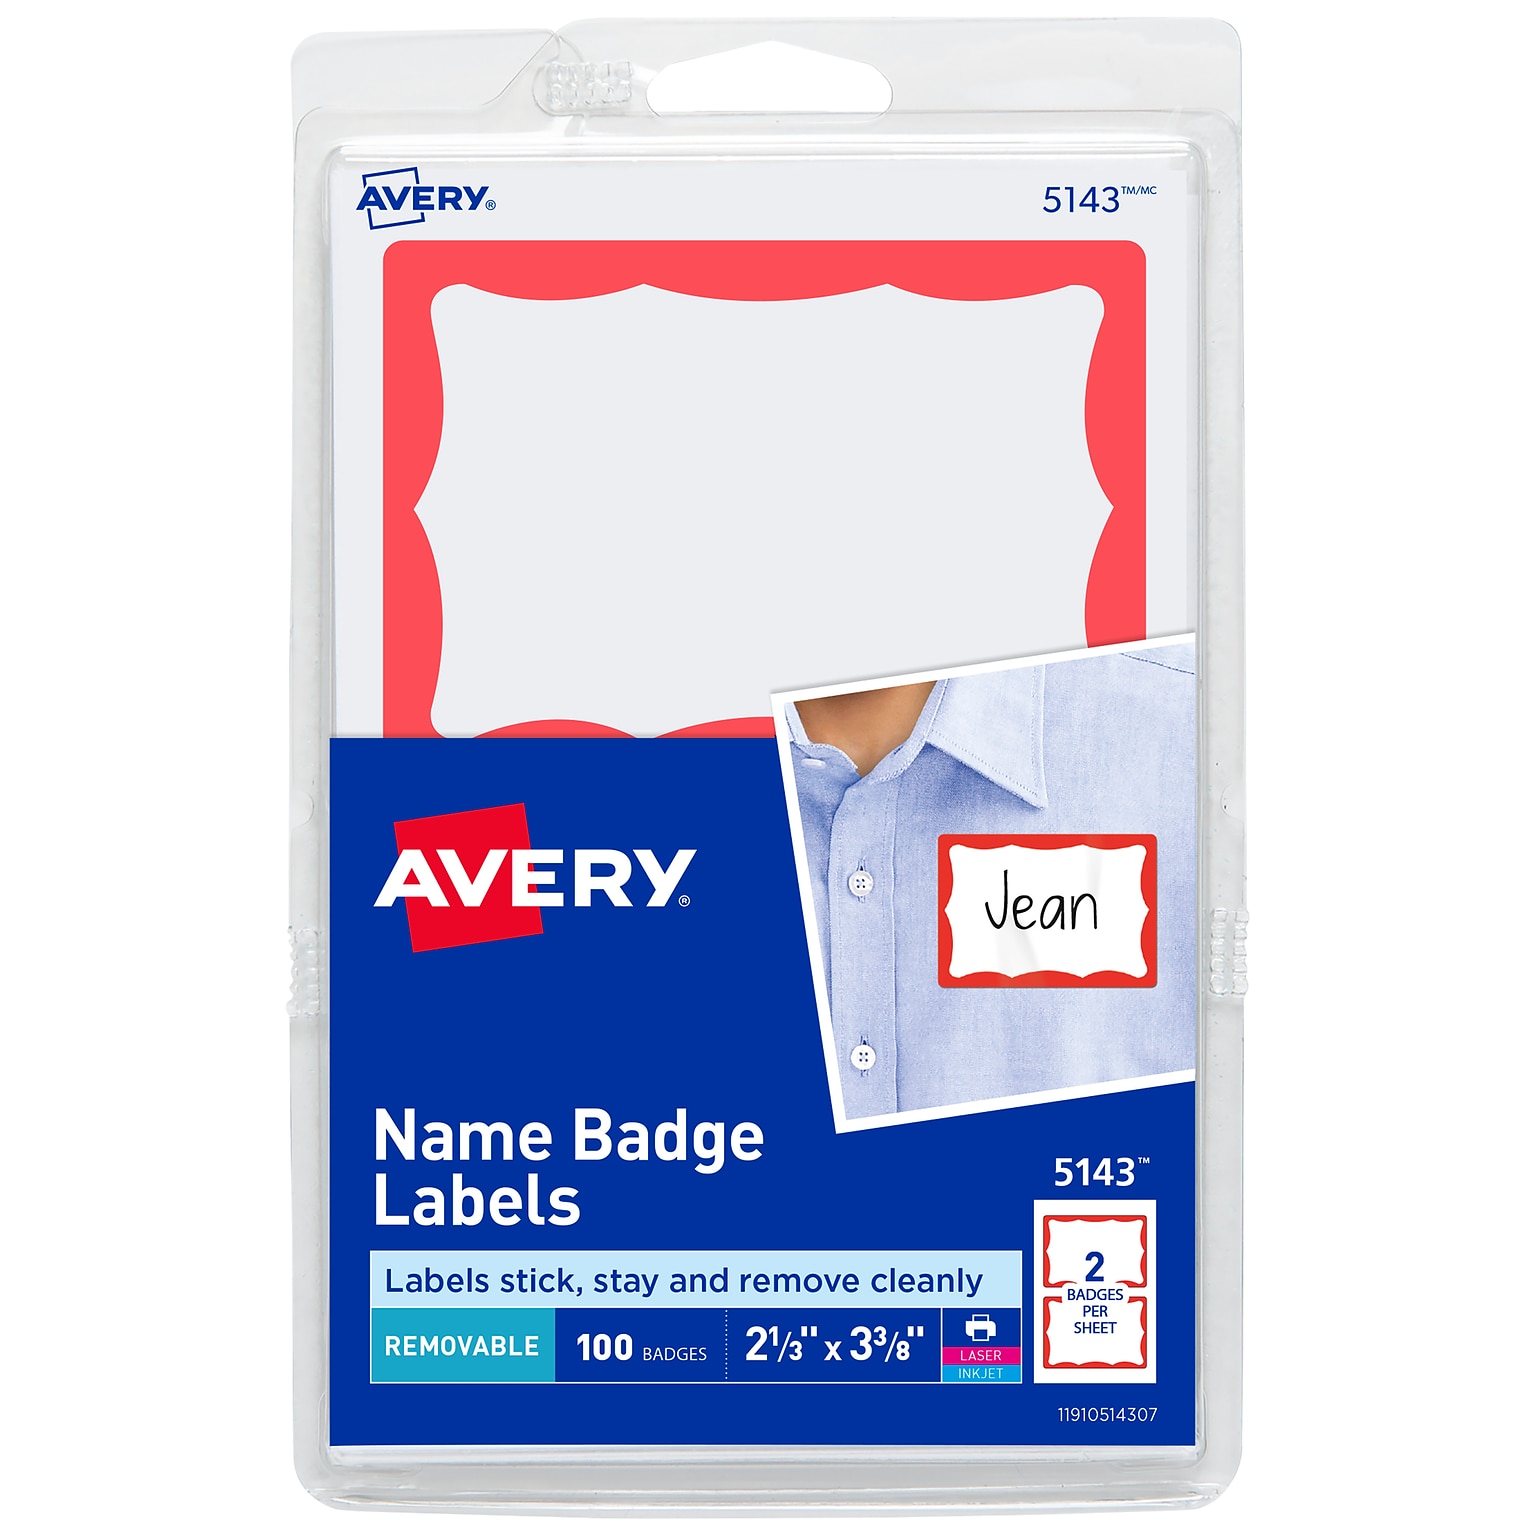 Avery Adhesive Laser/Inkjet Name Badge Labels, 2 1/3 x 3 3/8, White with Red Border, 100 Labels Per Pack (5143)